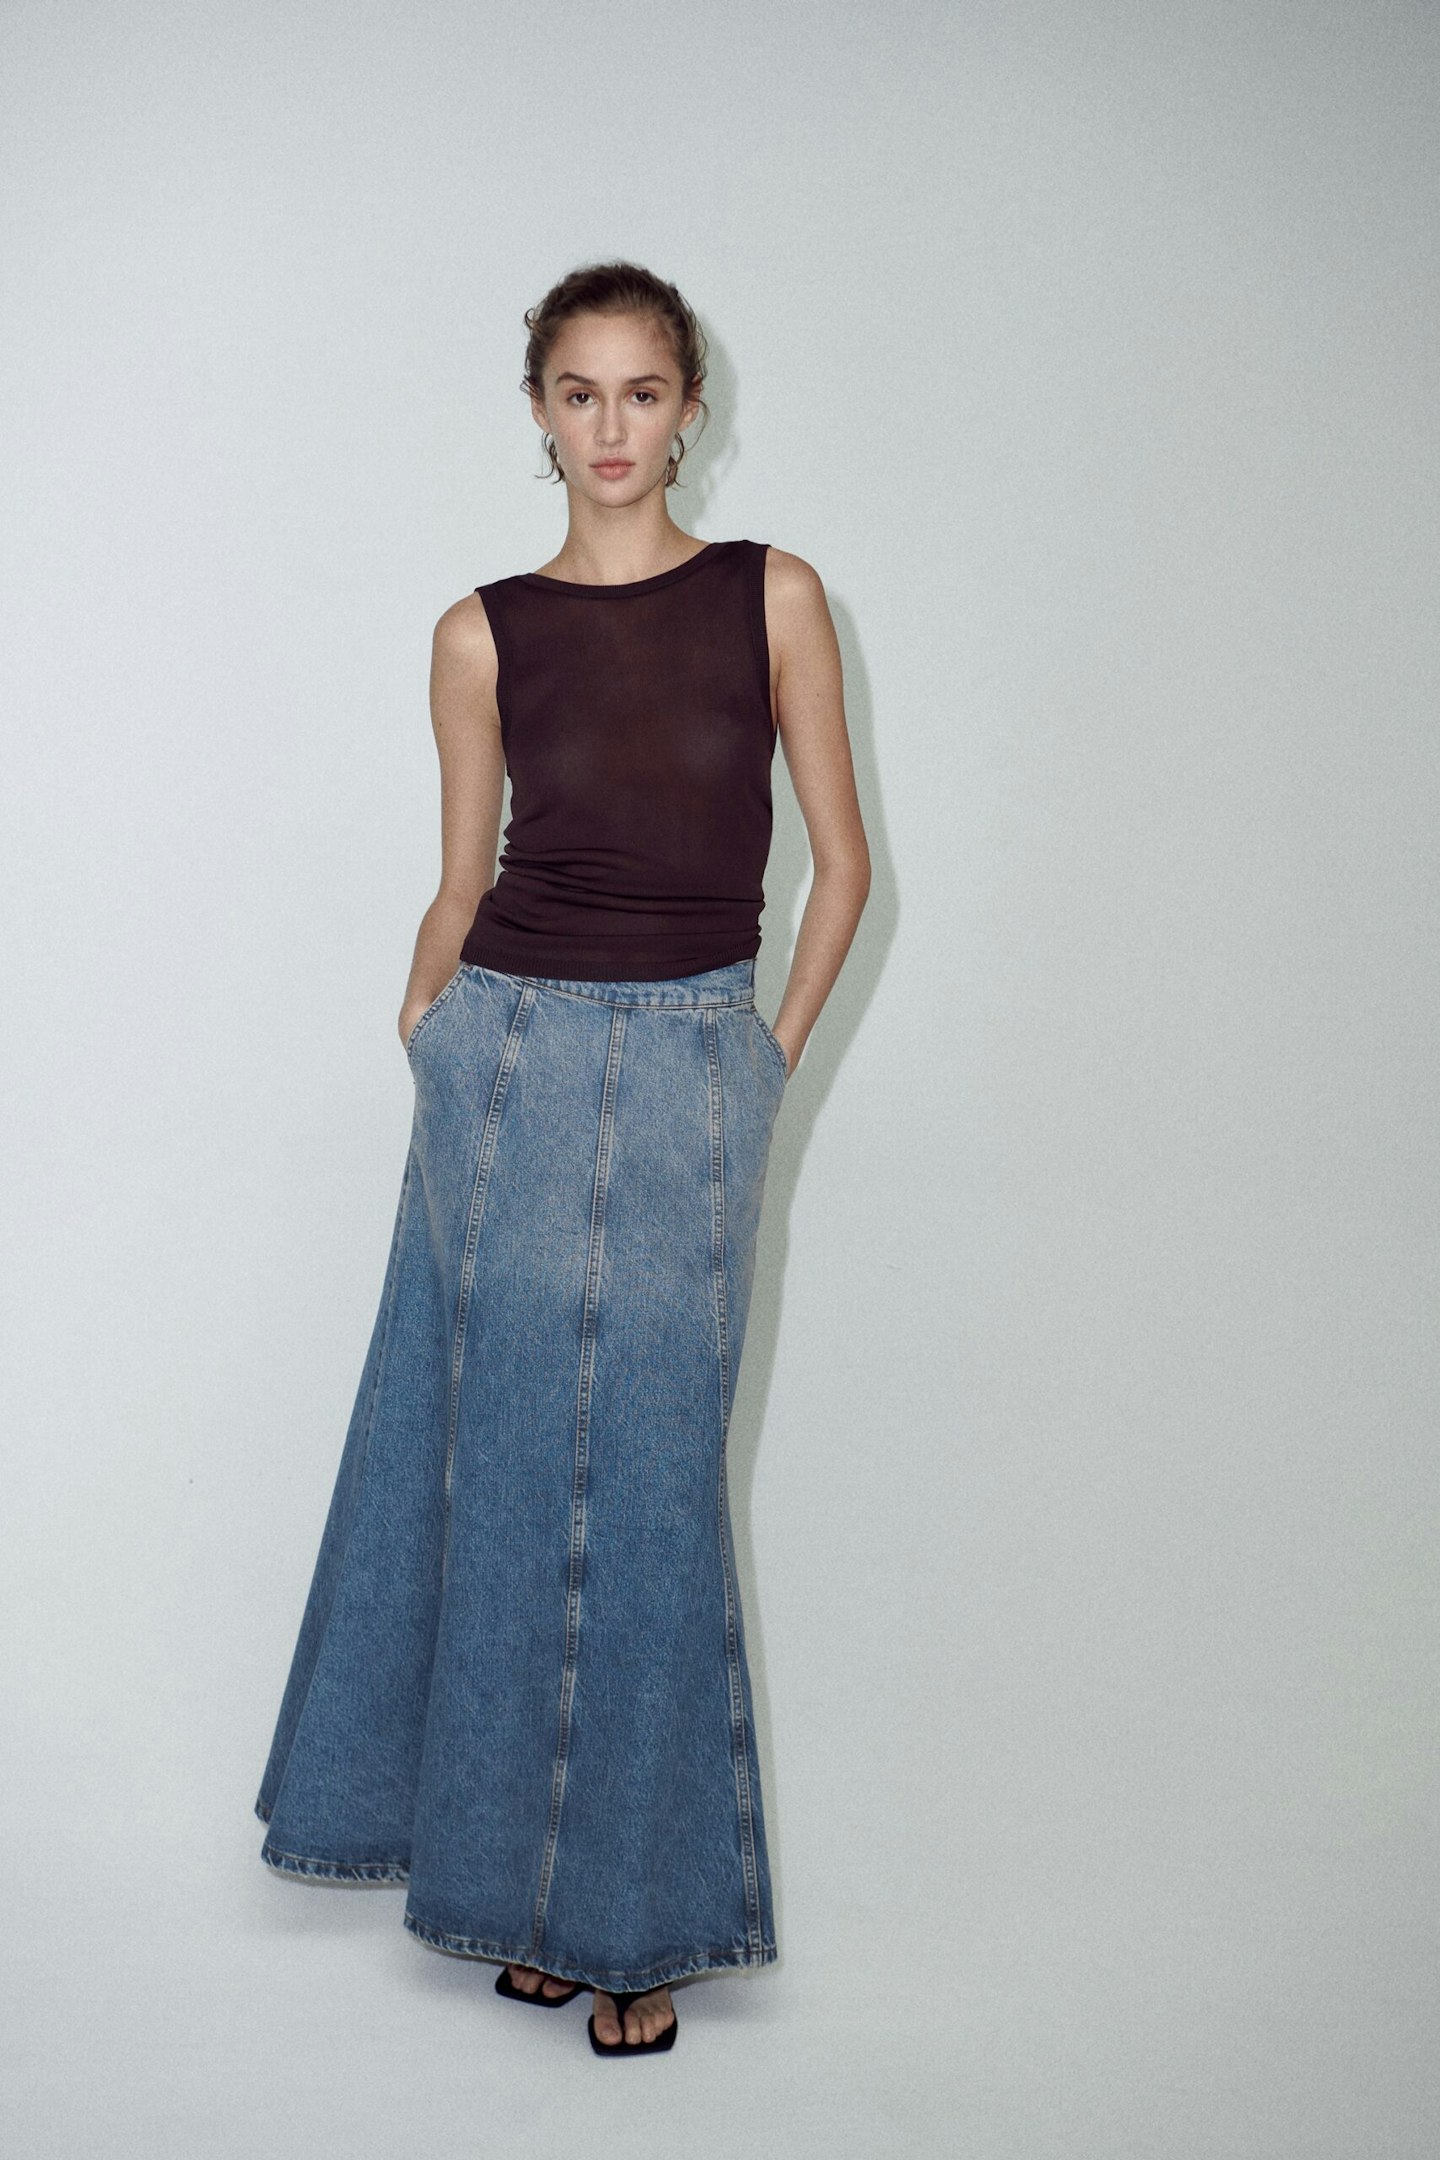 The Denim Maxi Skirt Is Back Once Again